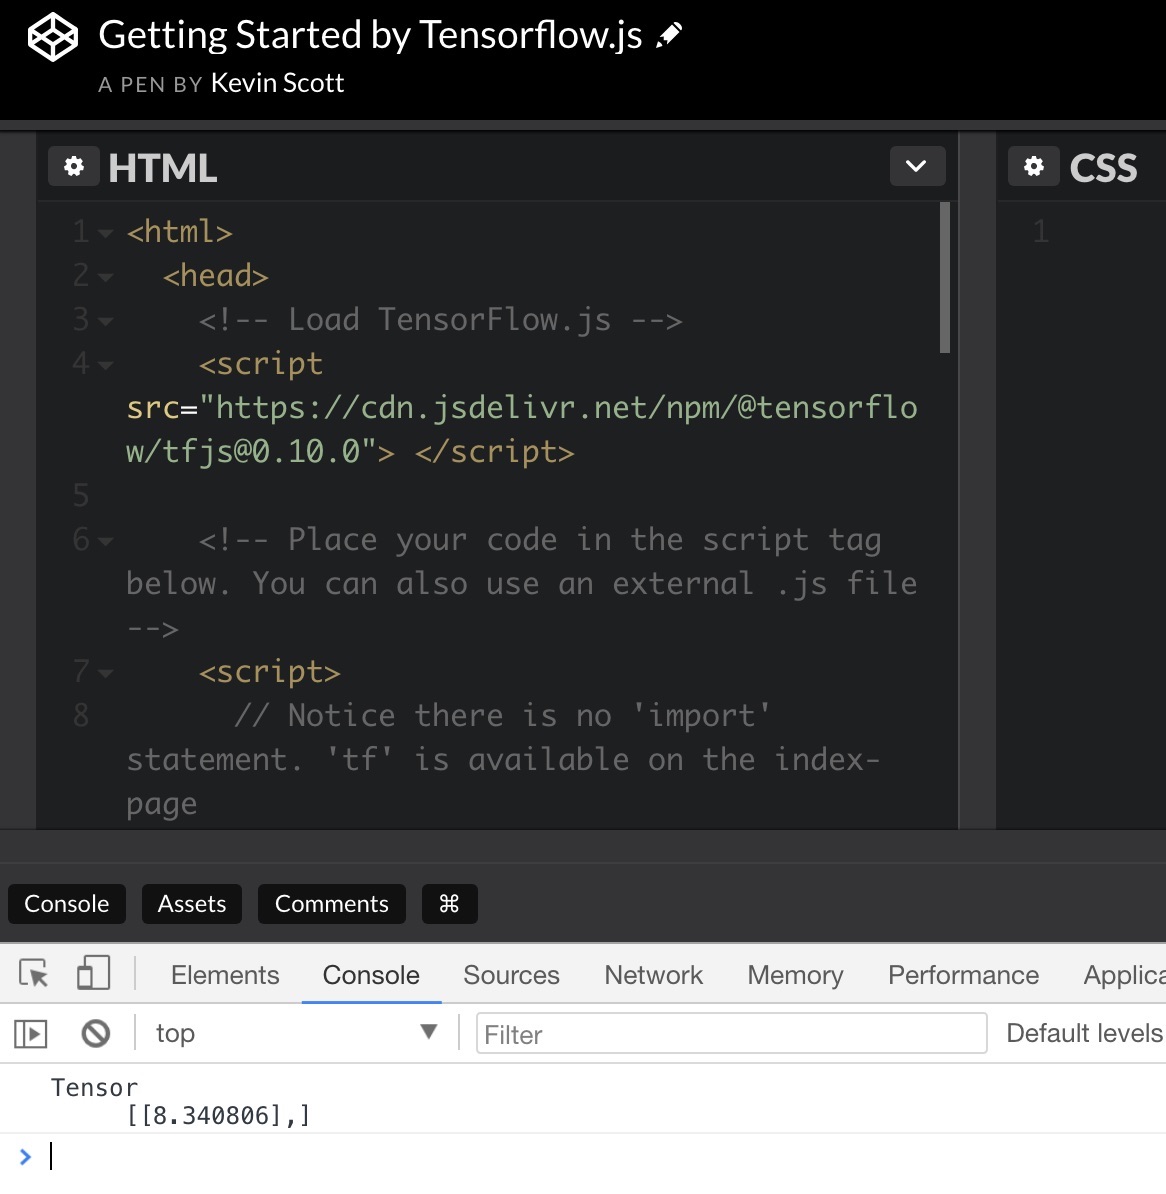 Codepen implementation of Getting Started from Tensorflow.js